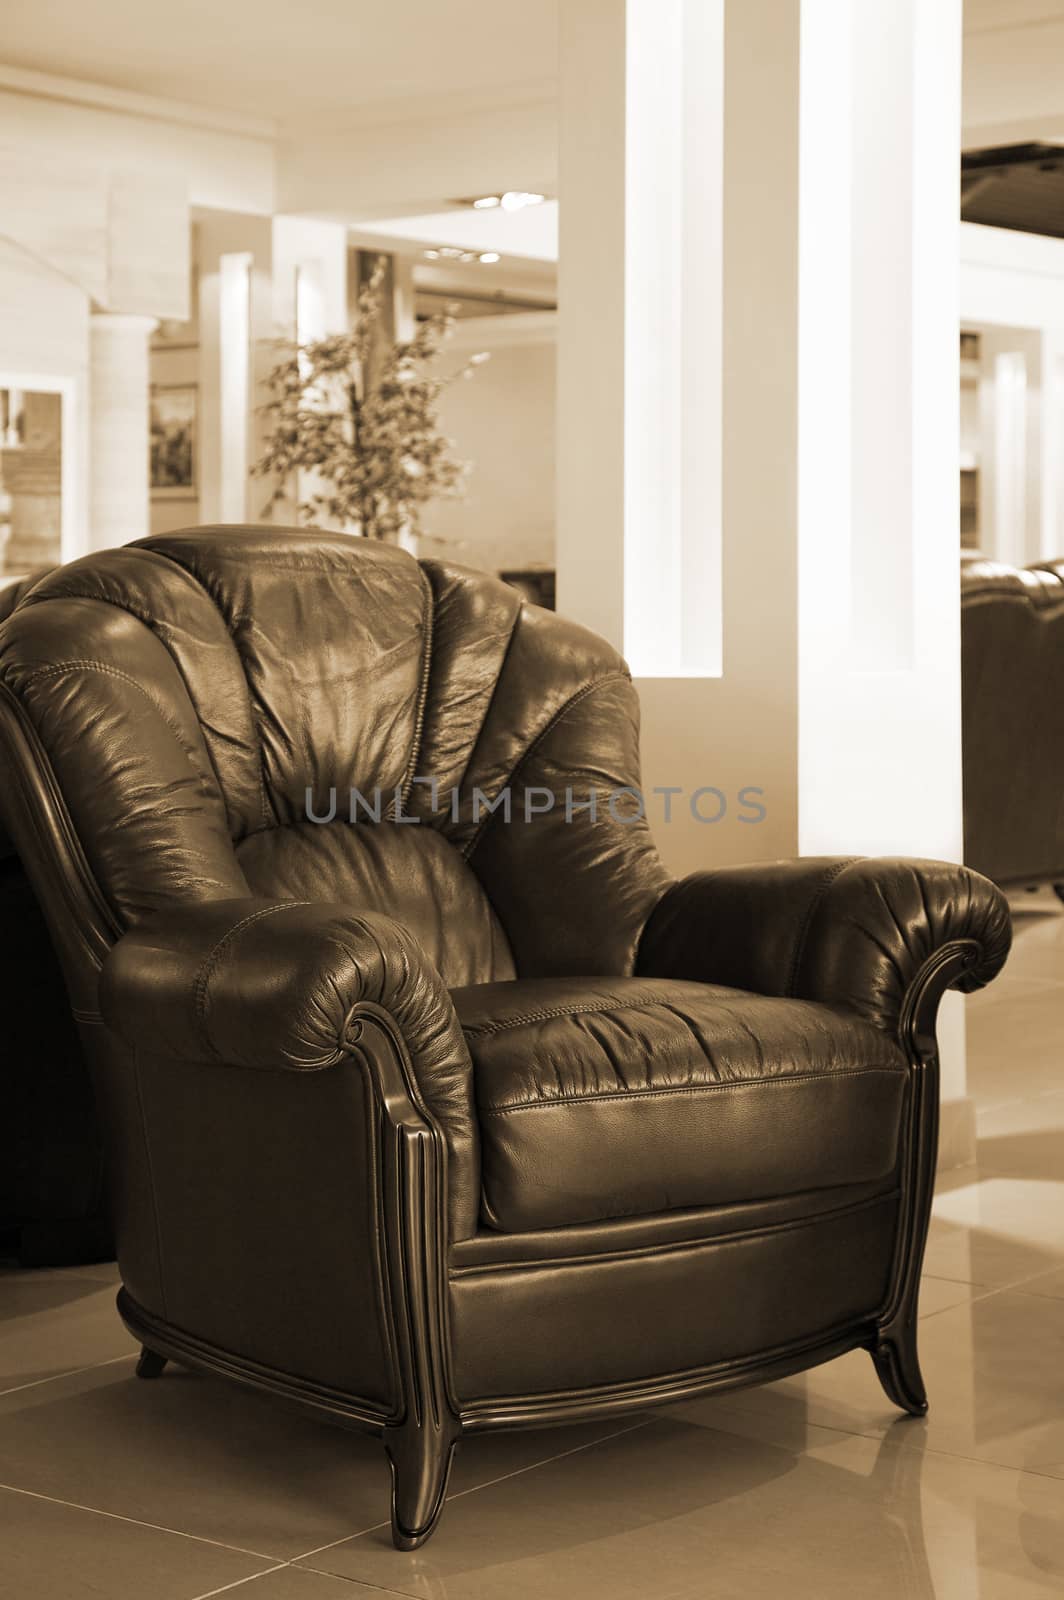 Beautiful leather armchair by terex